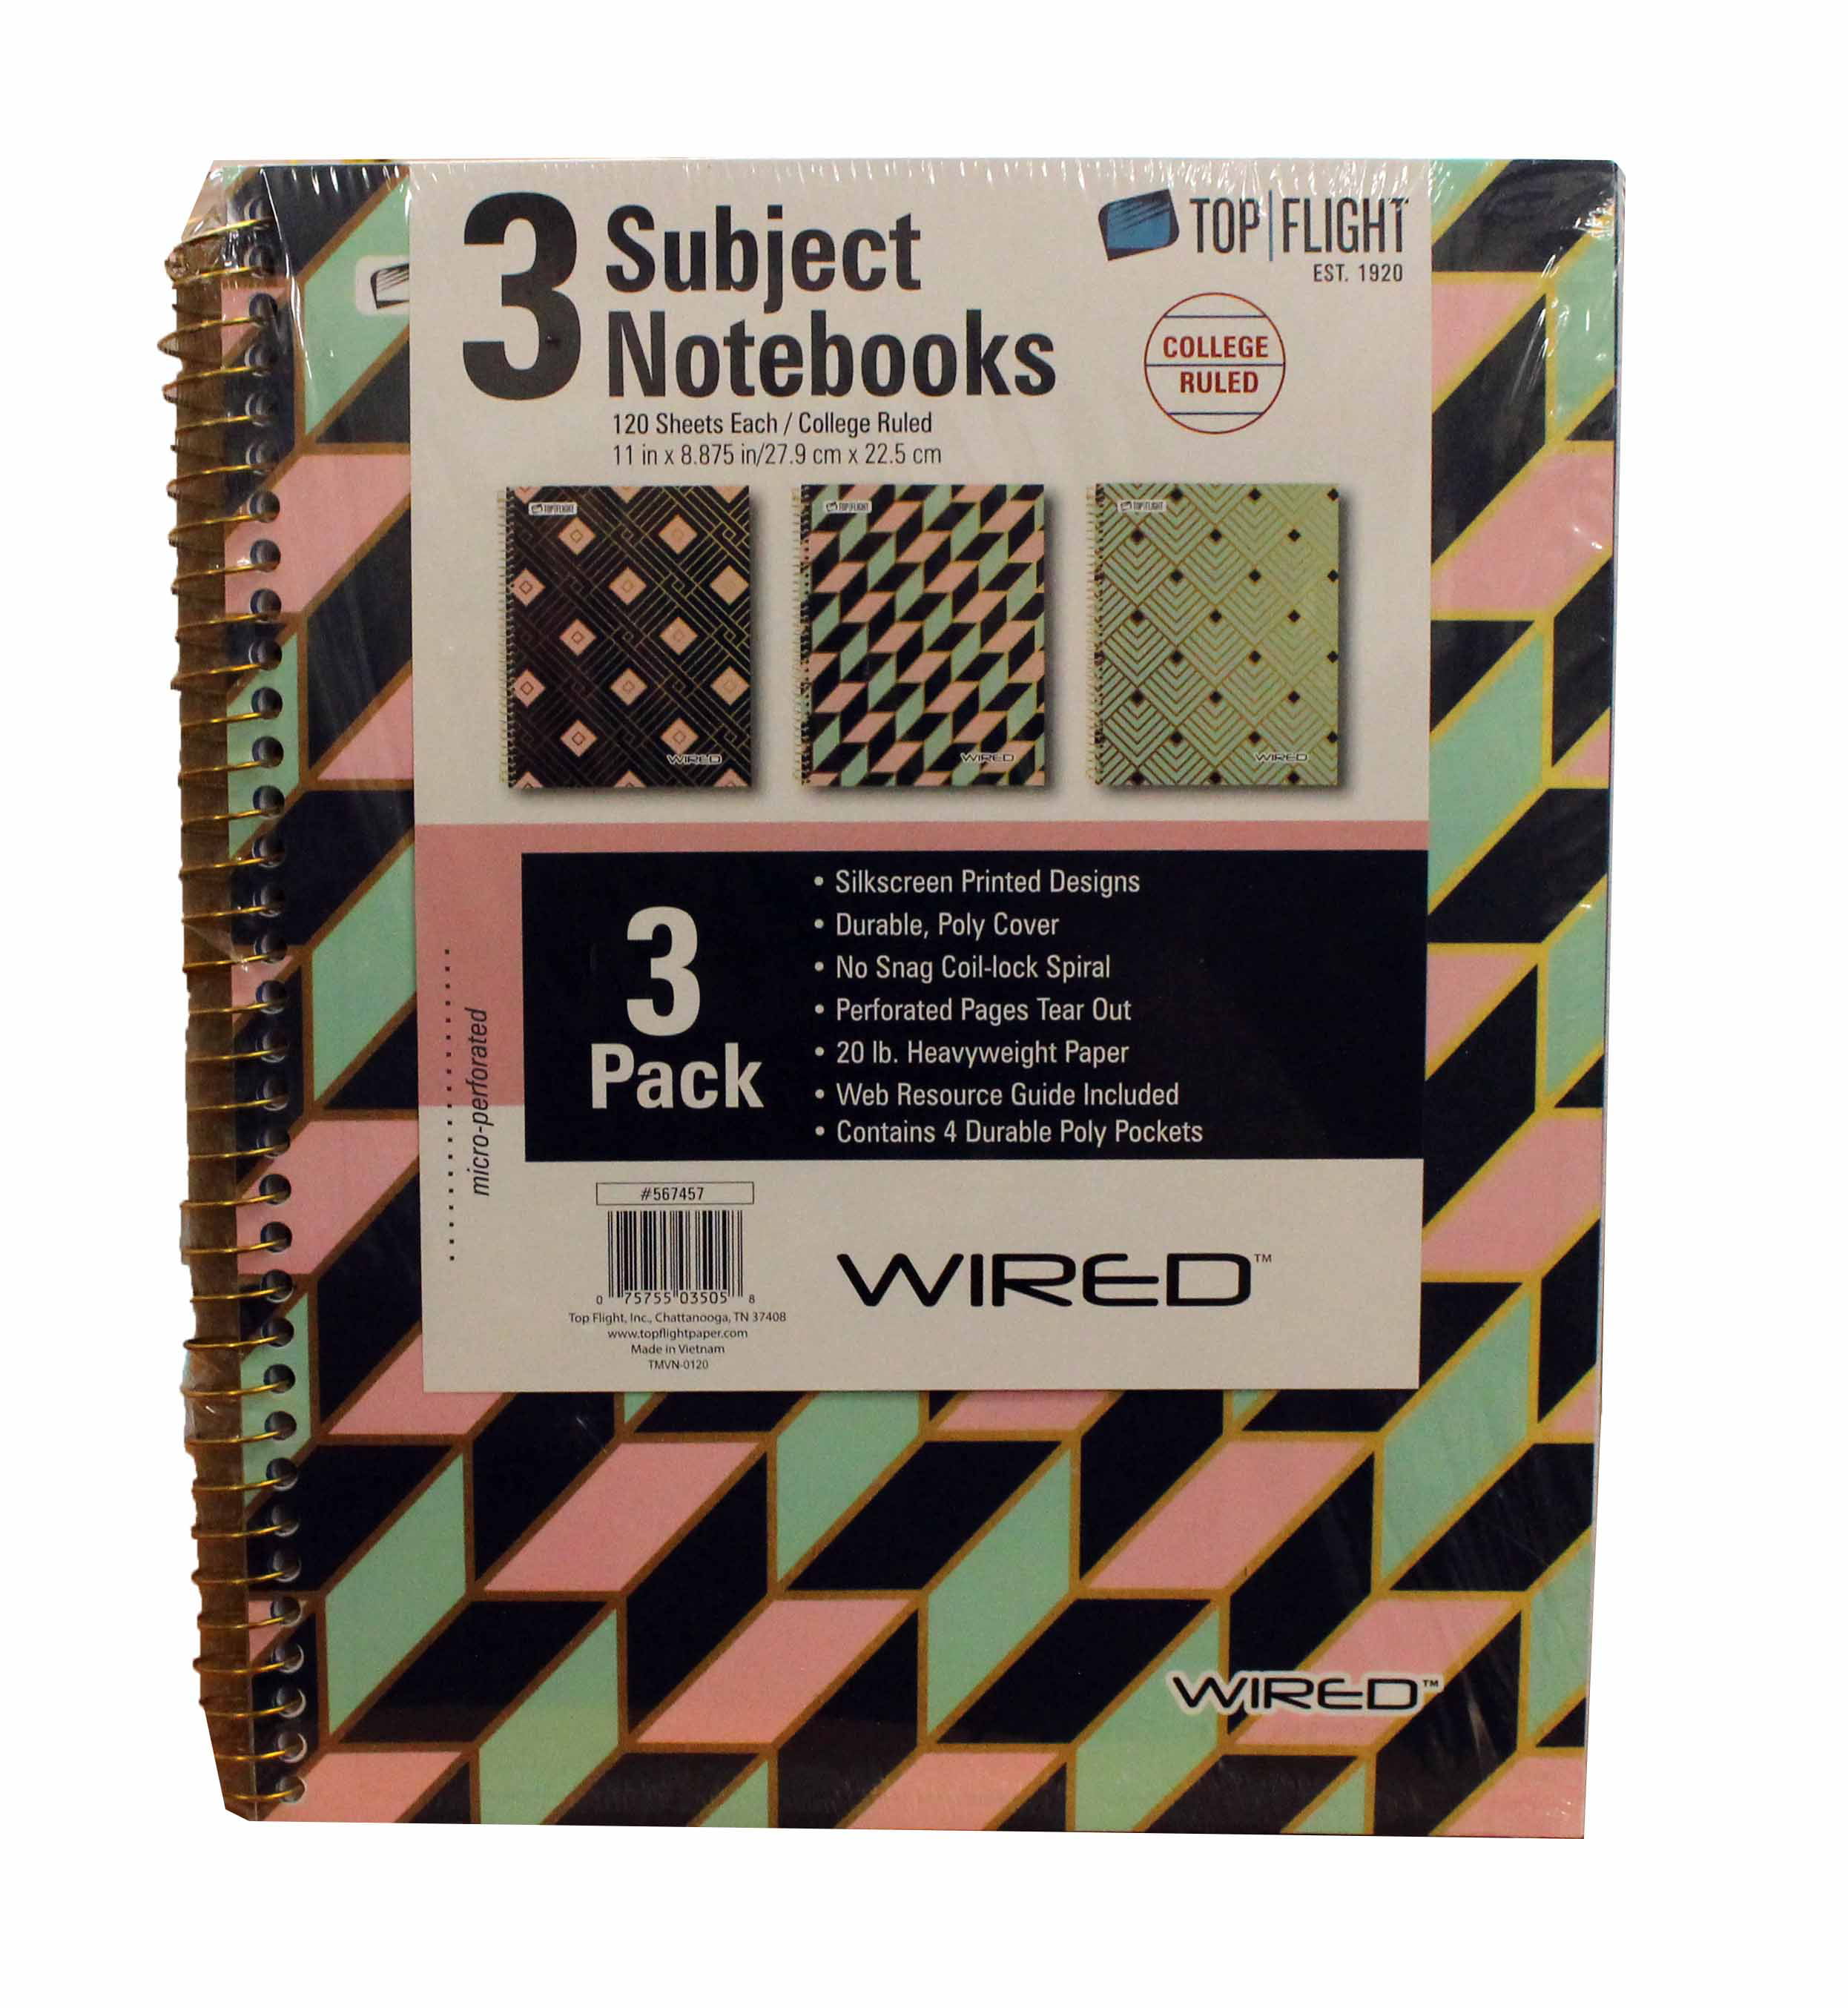 Top Flight Wired 3 Subject Notebooks 120 Sheets Each College Ruled 